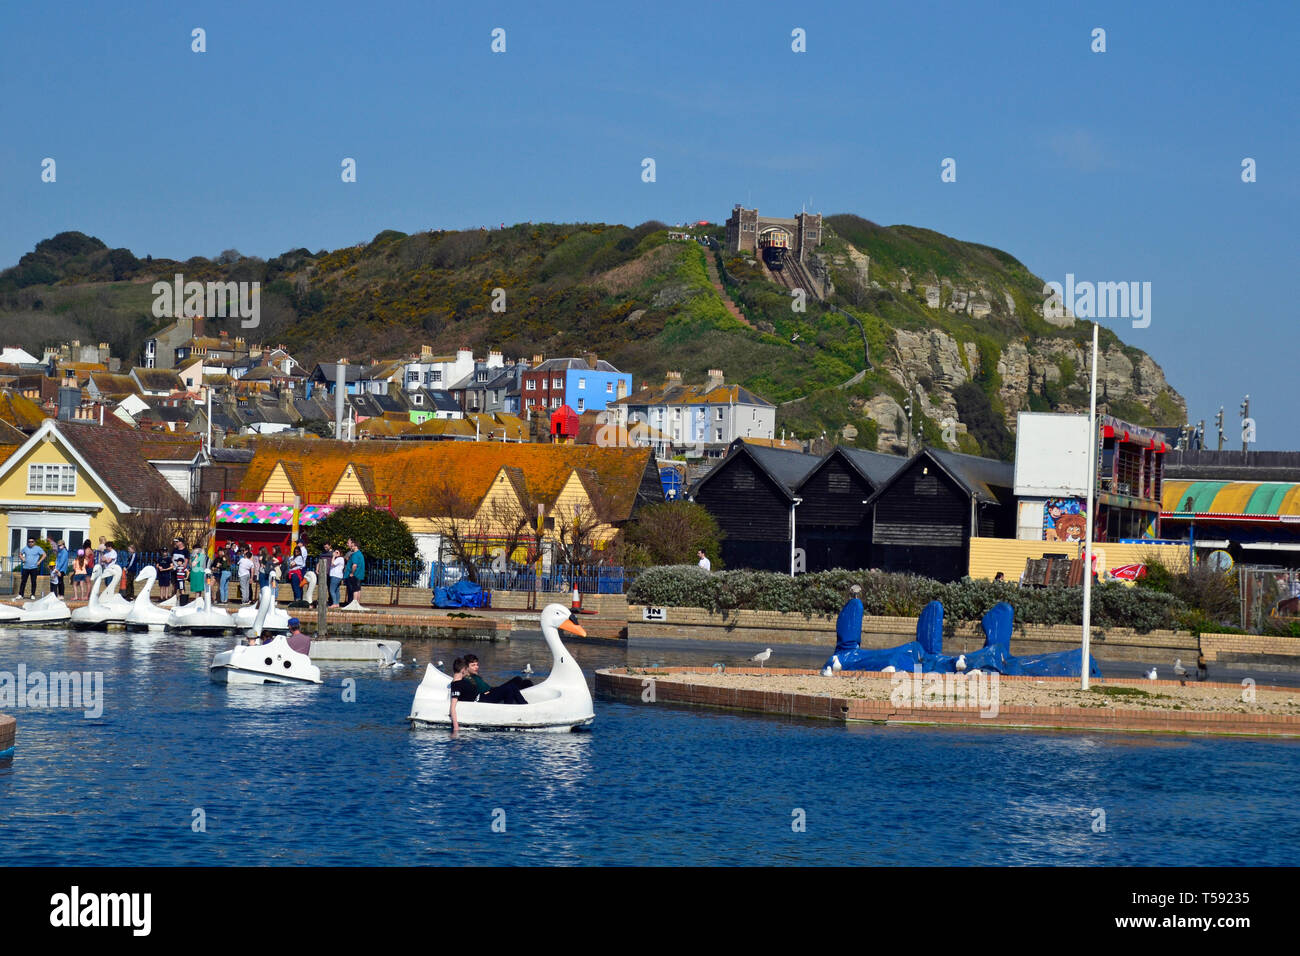 The Old Town Boating Lake with swan pedalos in Hastings, East Sussex, UK Stock Photo